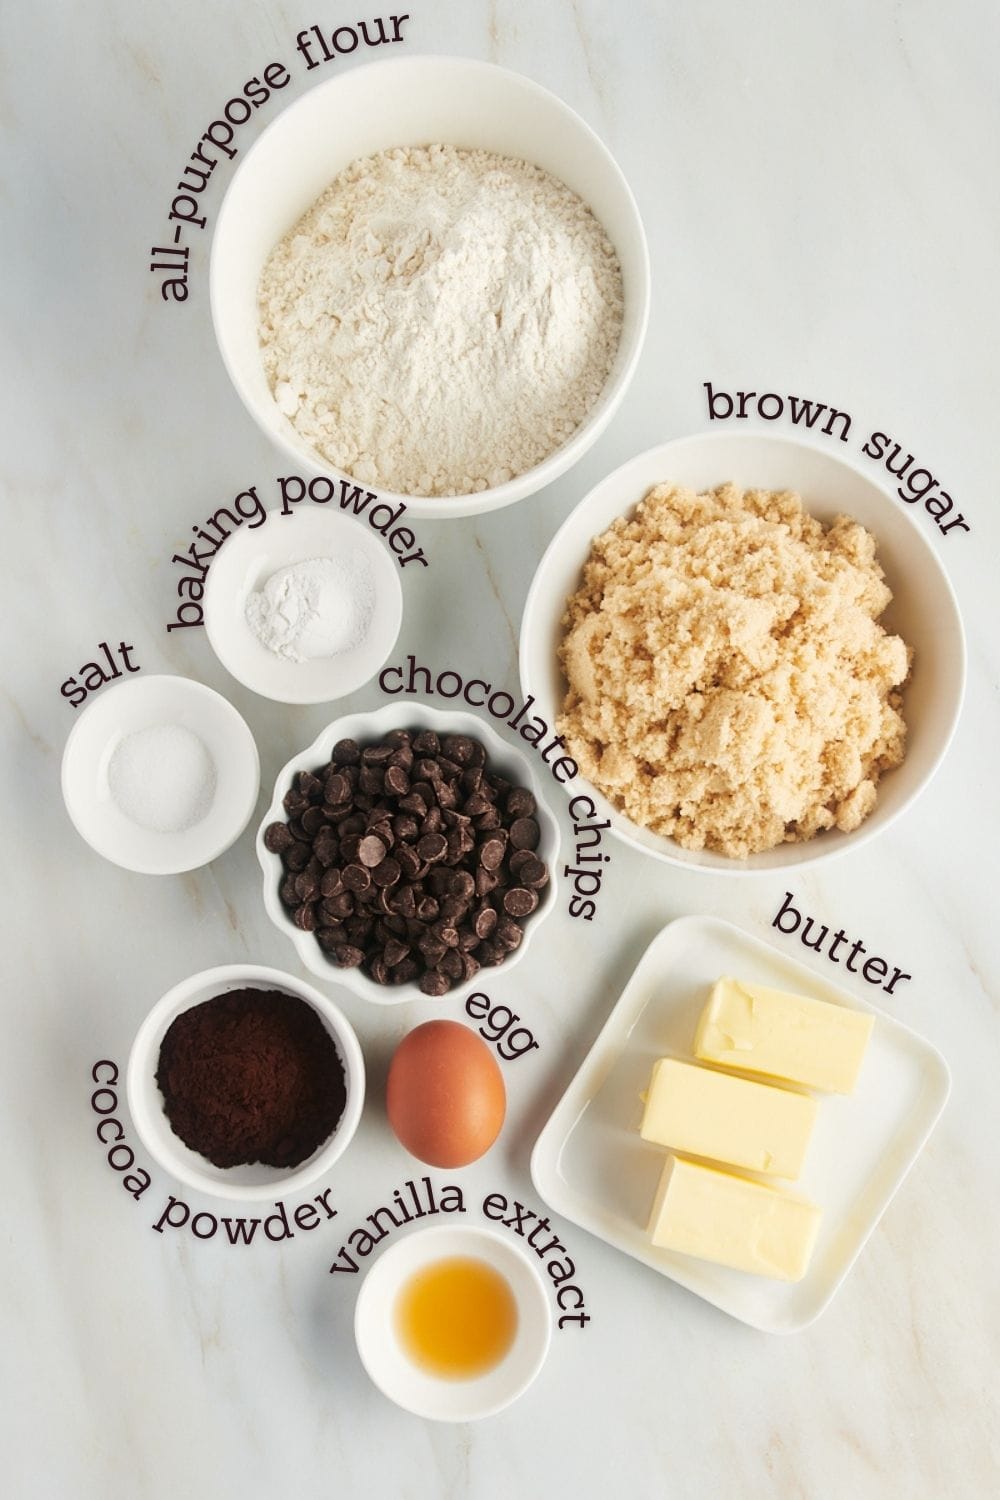 Overhead view of ingredients for chocolate chocolate chip cookies